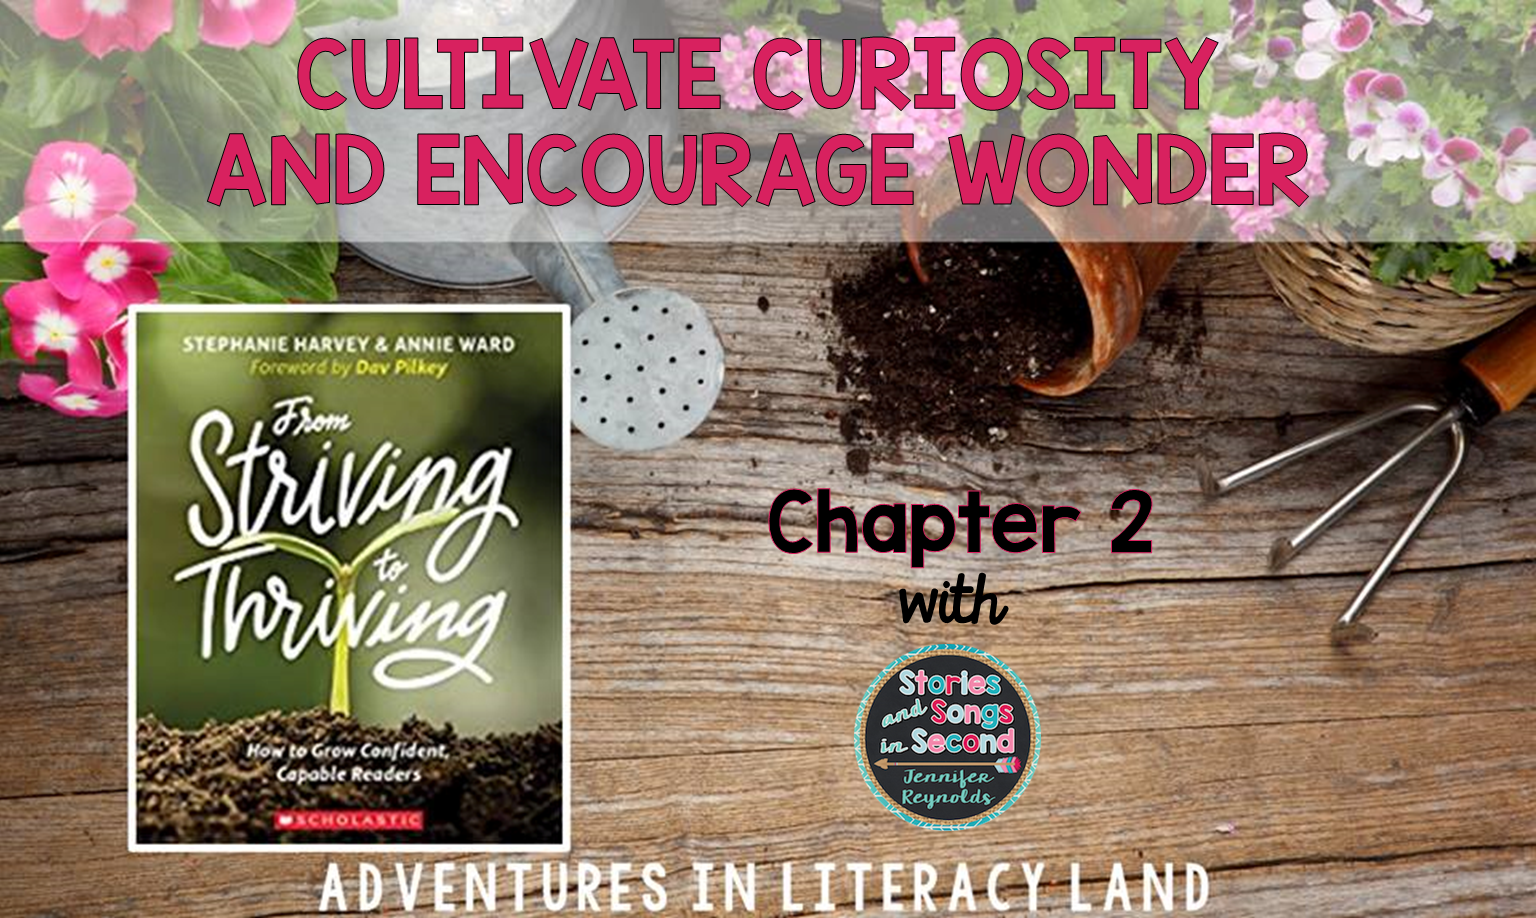 Explore Chapter 2 of From Striving to Thriving and learn about how cultivating curiosity and encouraging questioning are necessary strategies in helping striving readers develop interest and confidence.